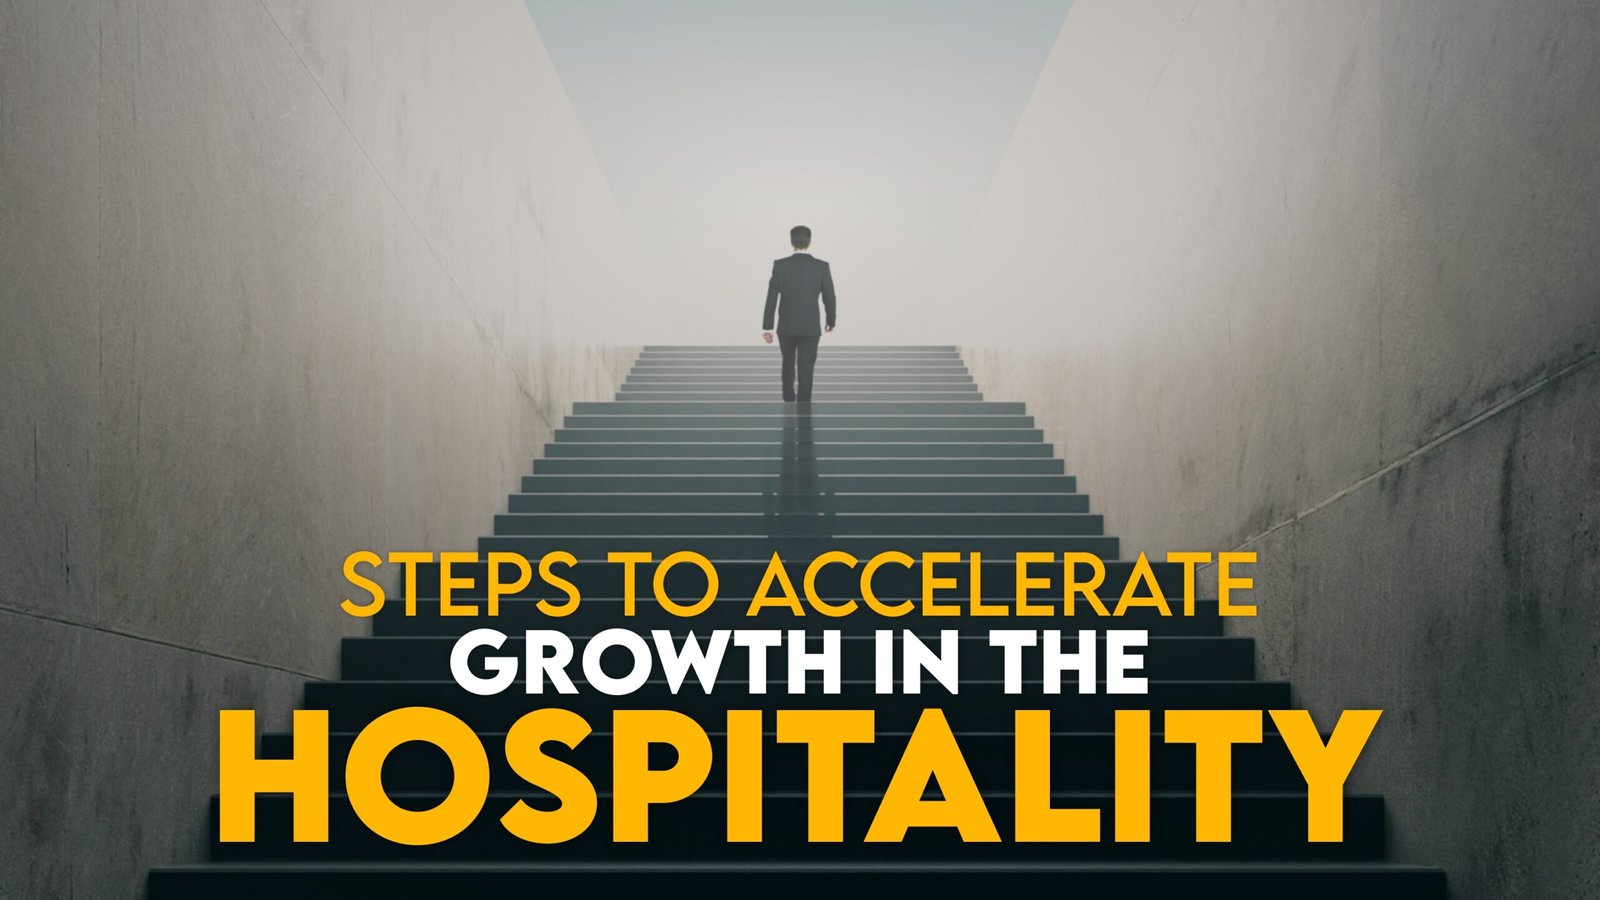 Steps to accelerate growth in the hospitality